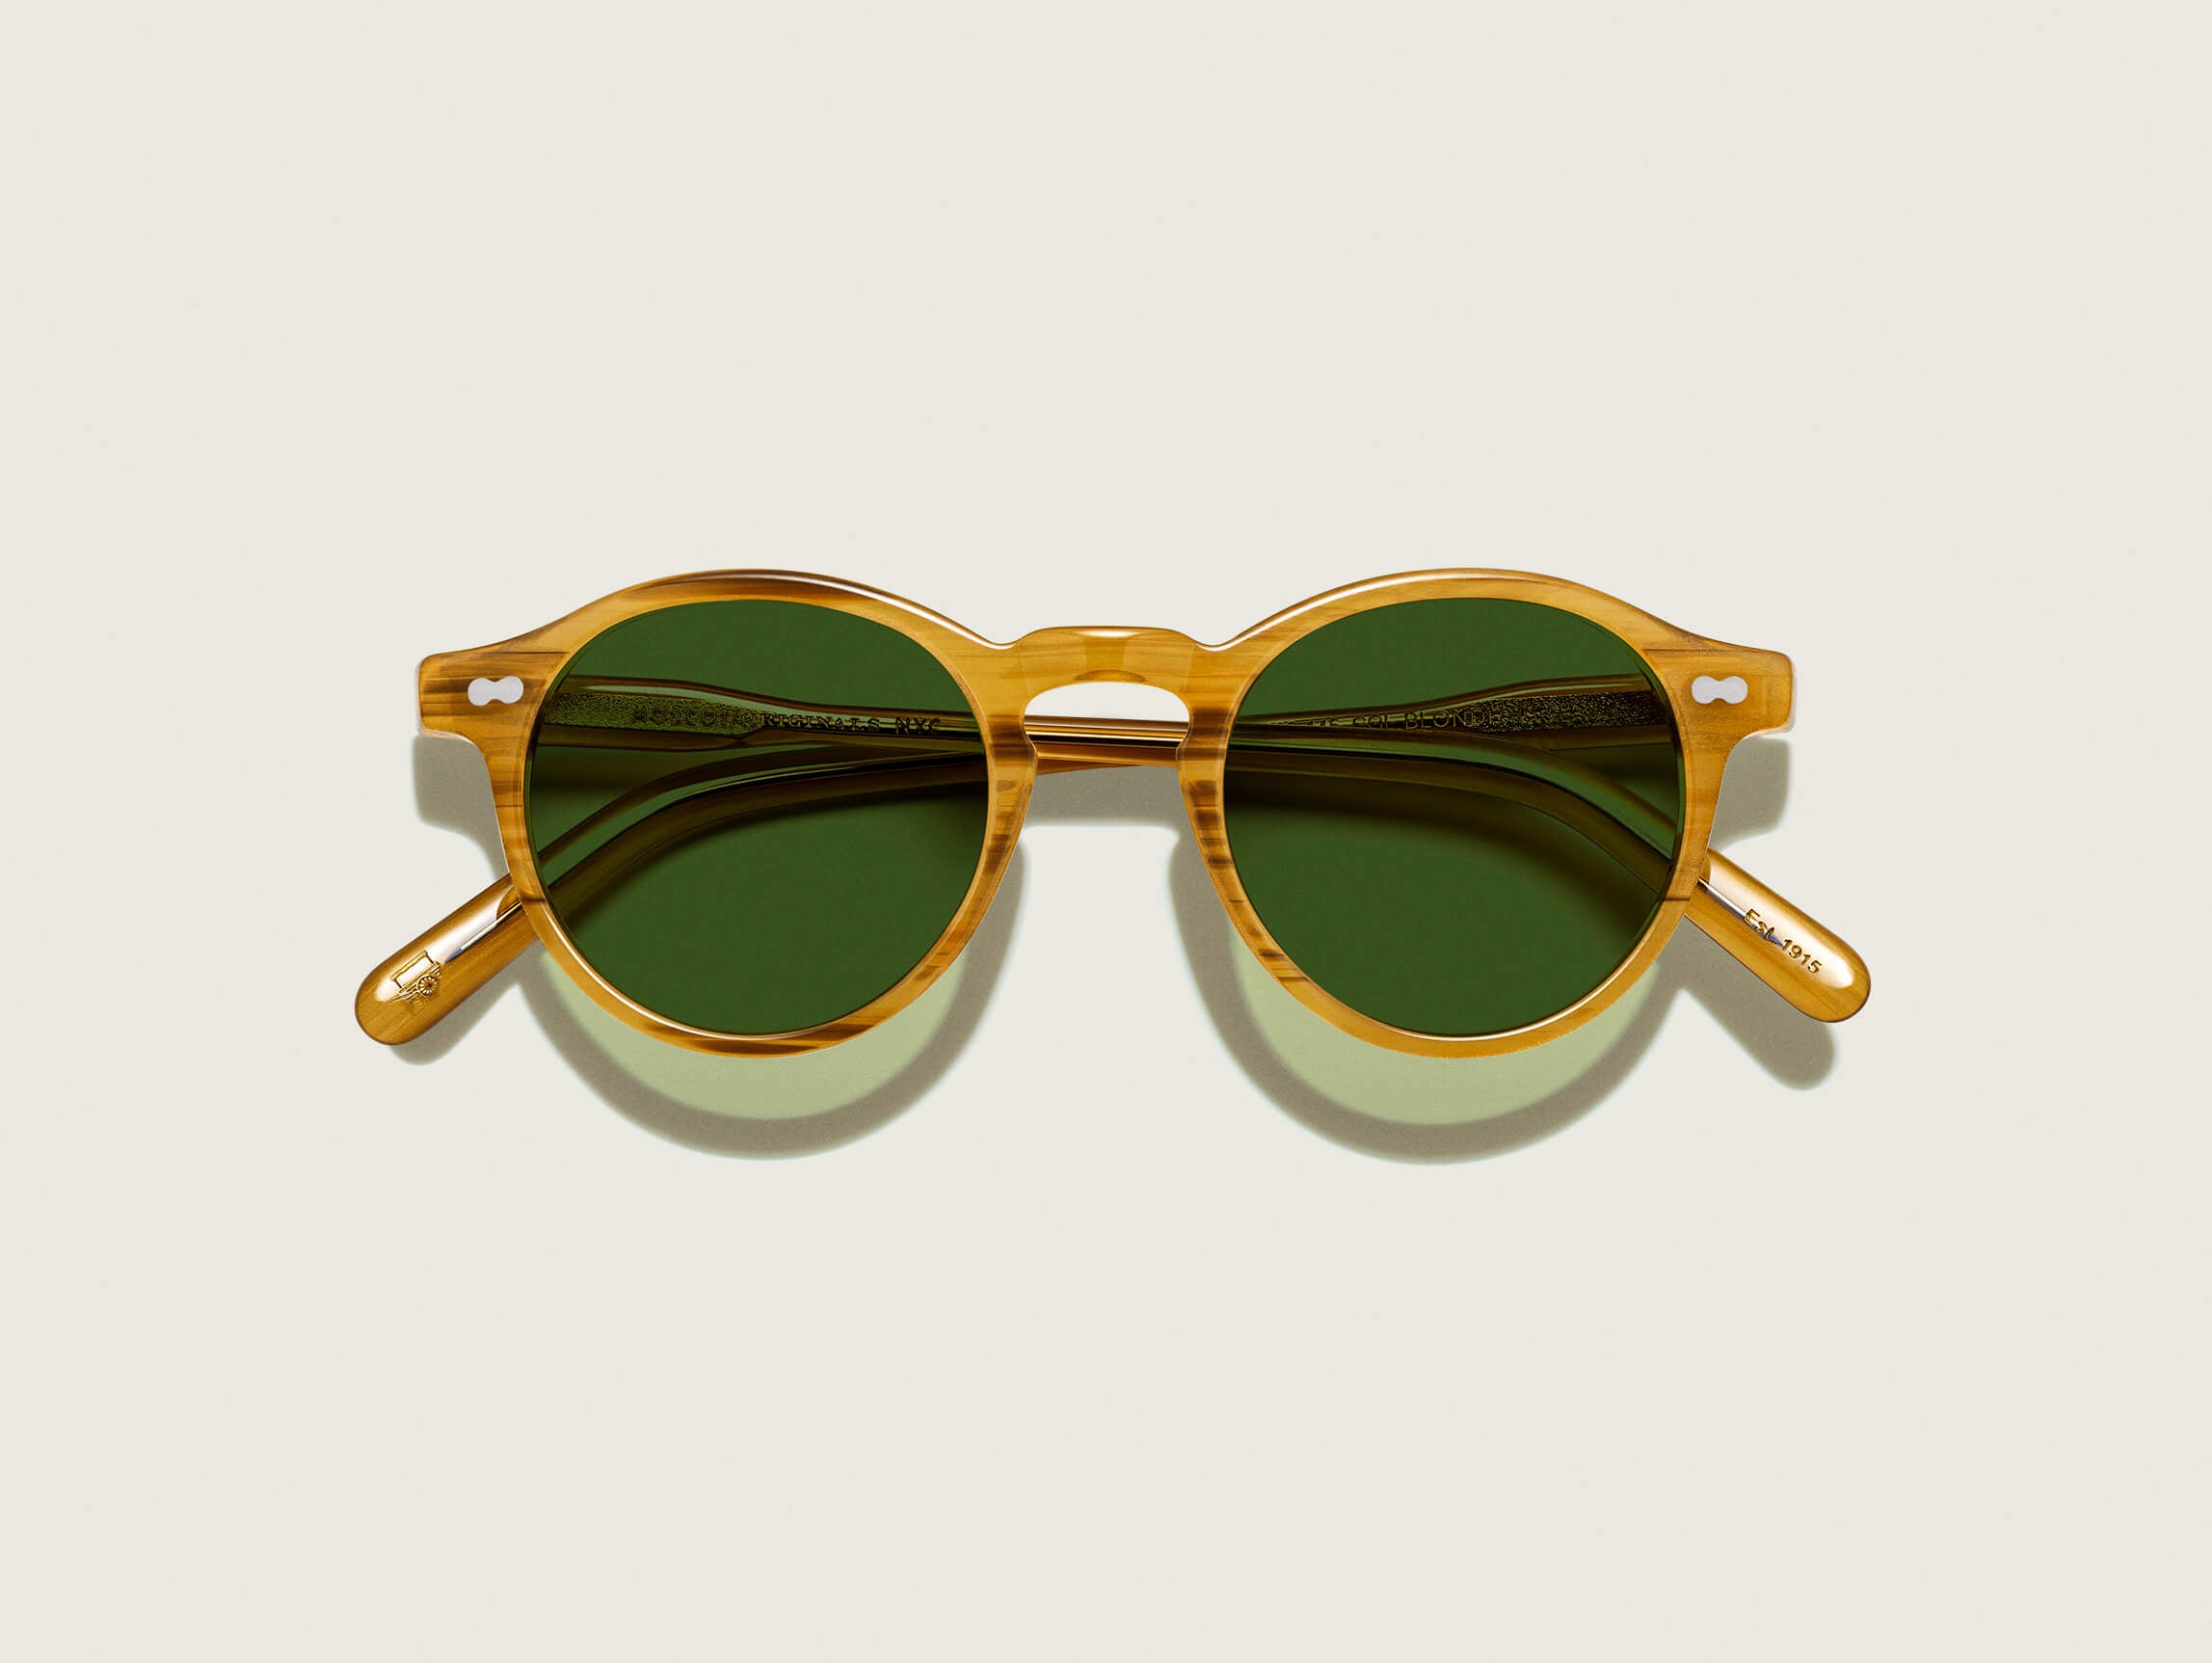 #color_blonde | The MILTZEN in Blonde with Calibar Green Glass Lenses